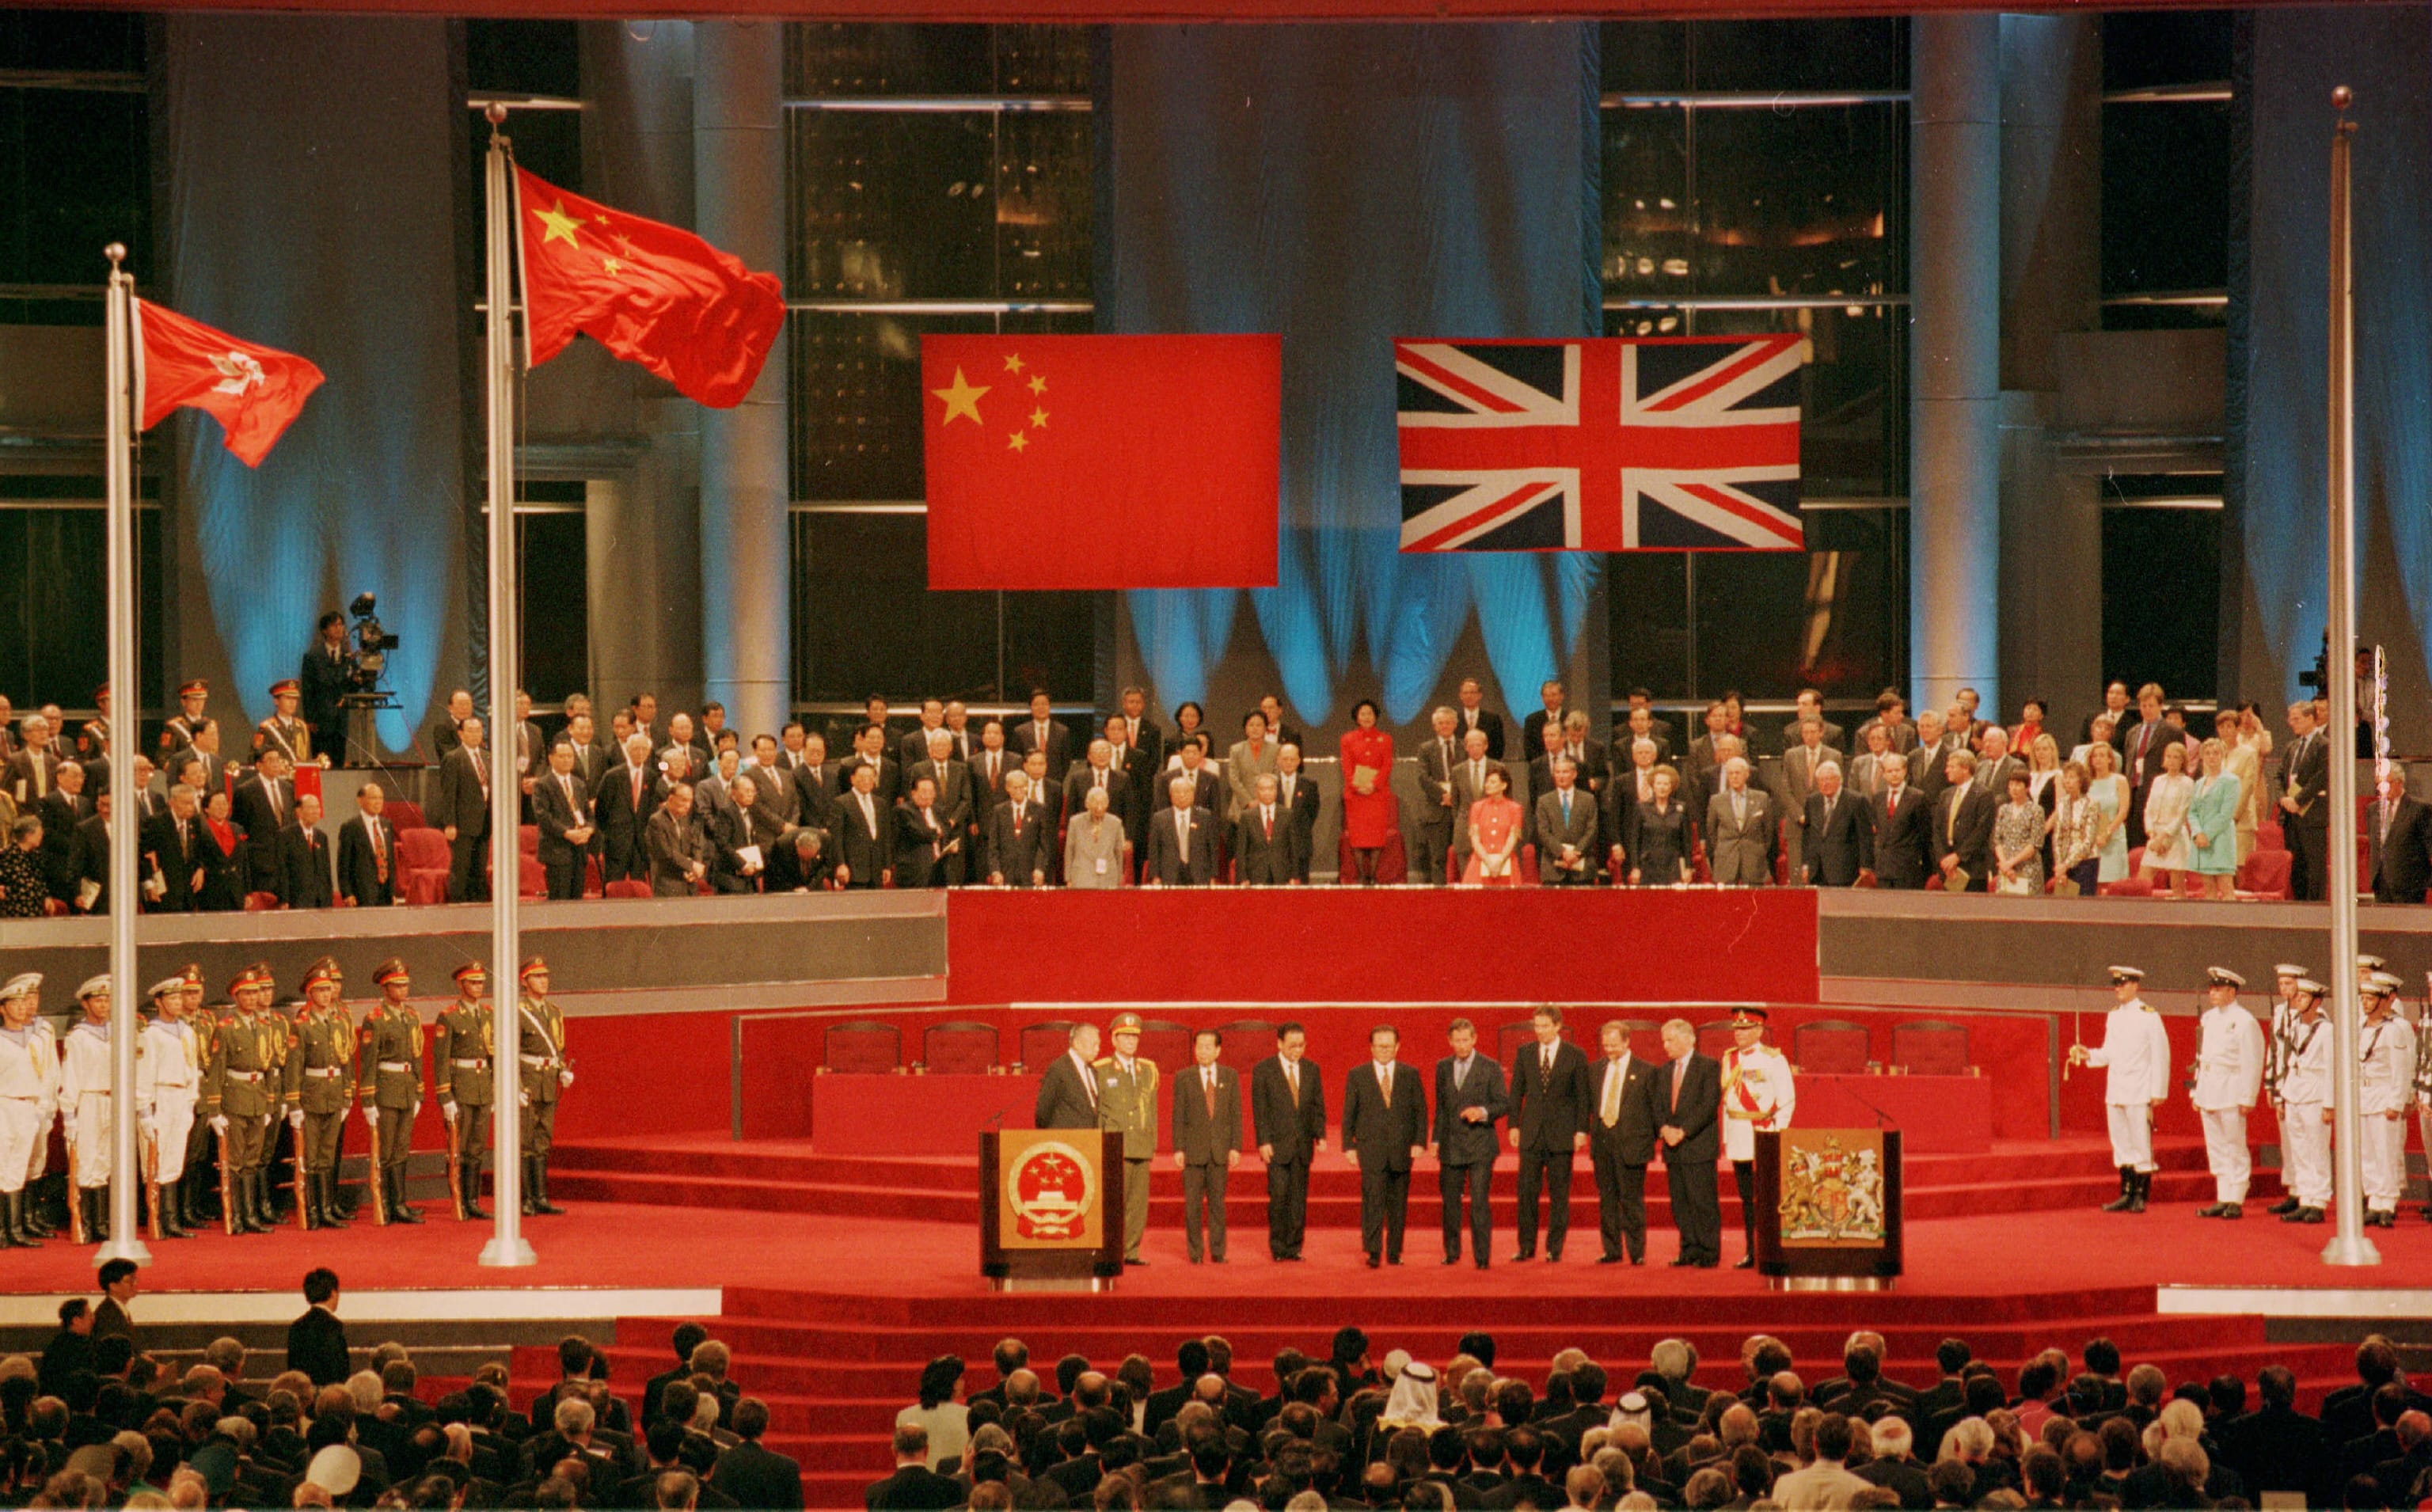 Chinese and British leaders attend the Hong Kong handover ceremony held on 1 July, 1997.